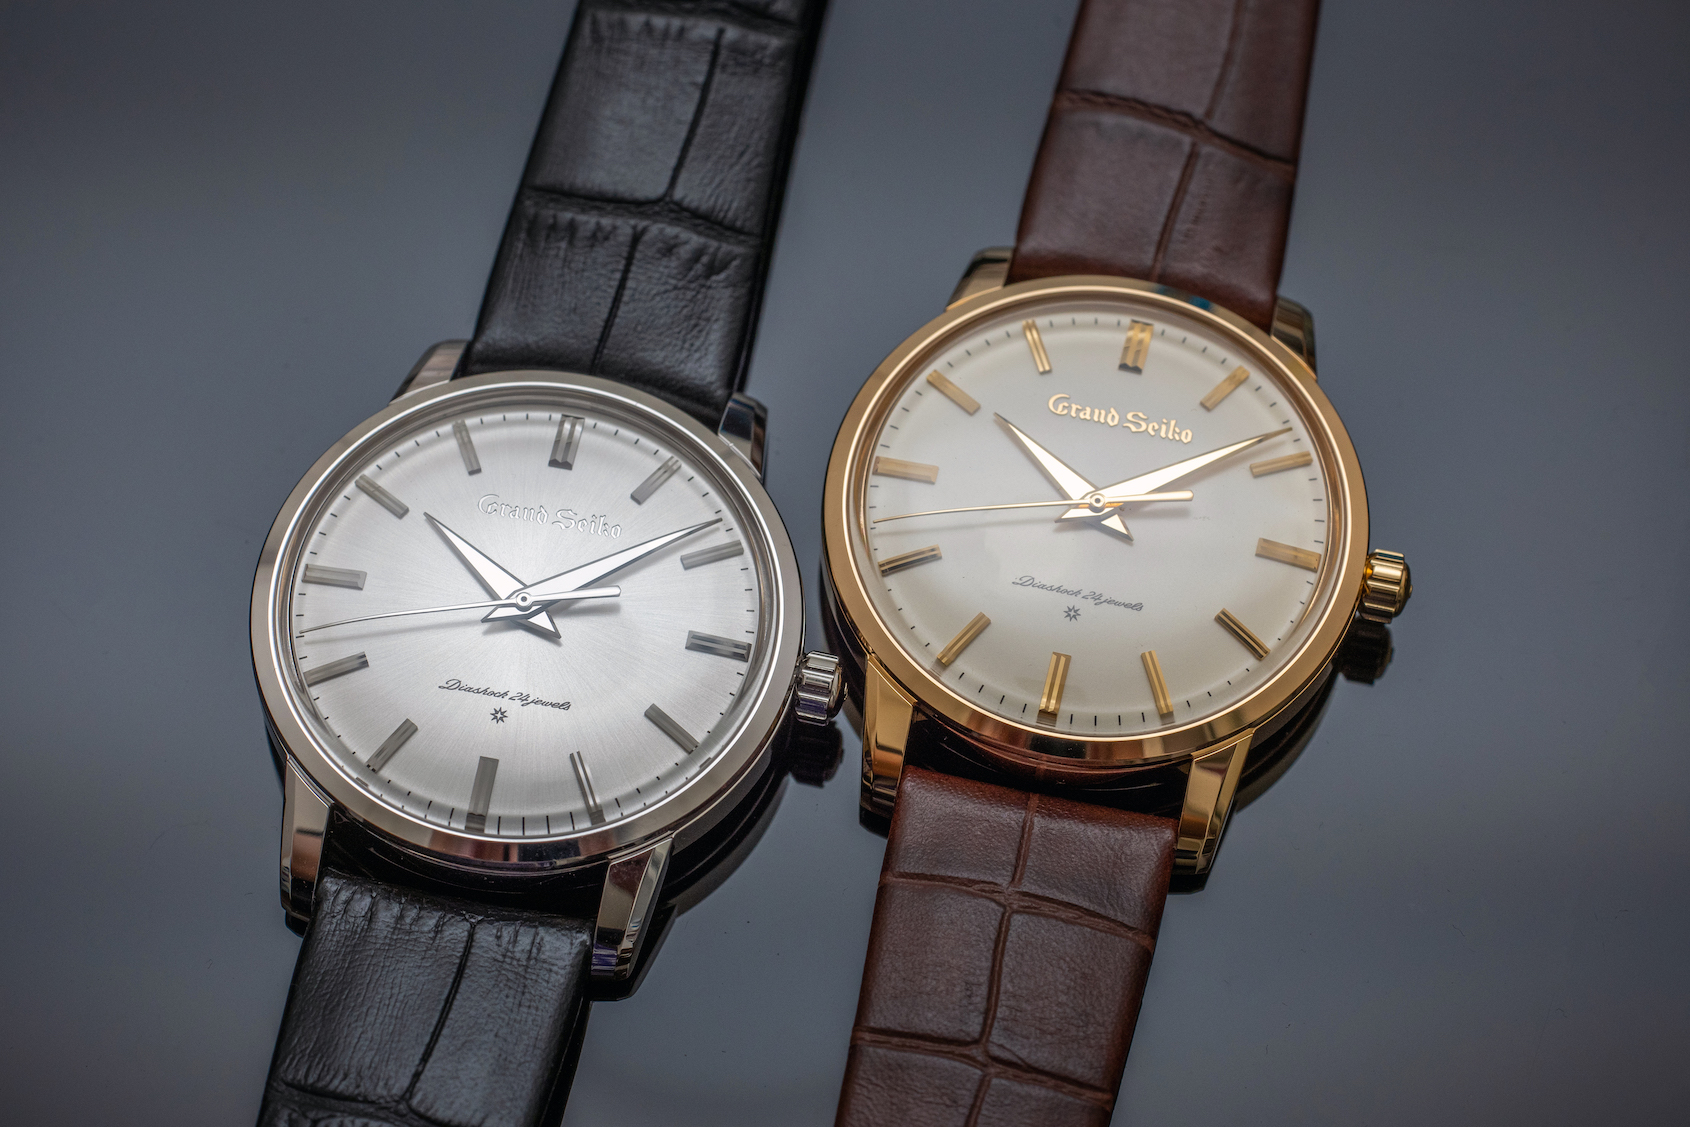 VIDEO: Two precious metal Grand Seiko First references to celebrate the 60th anniversary